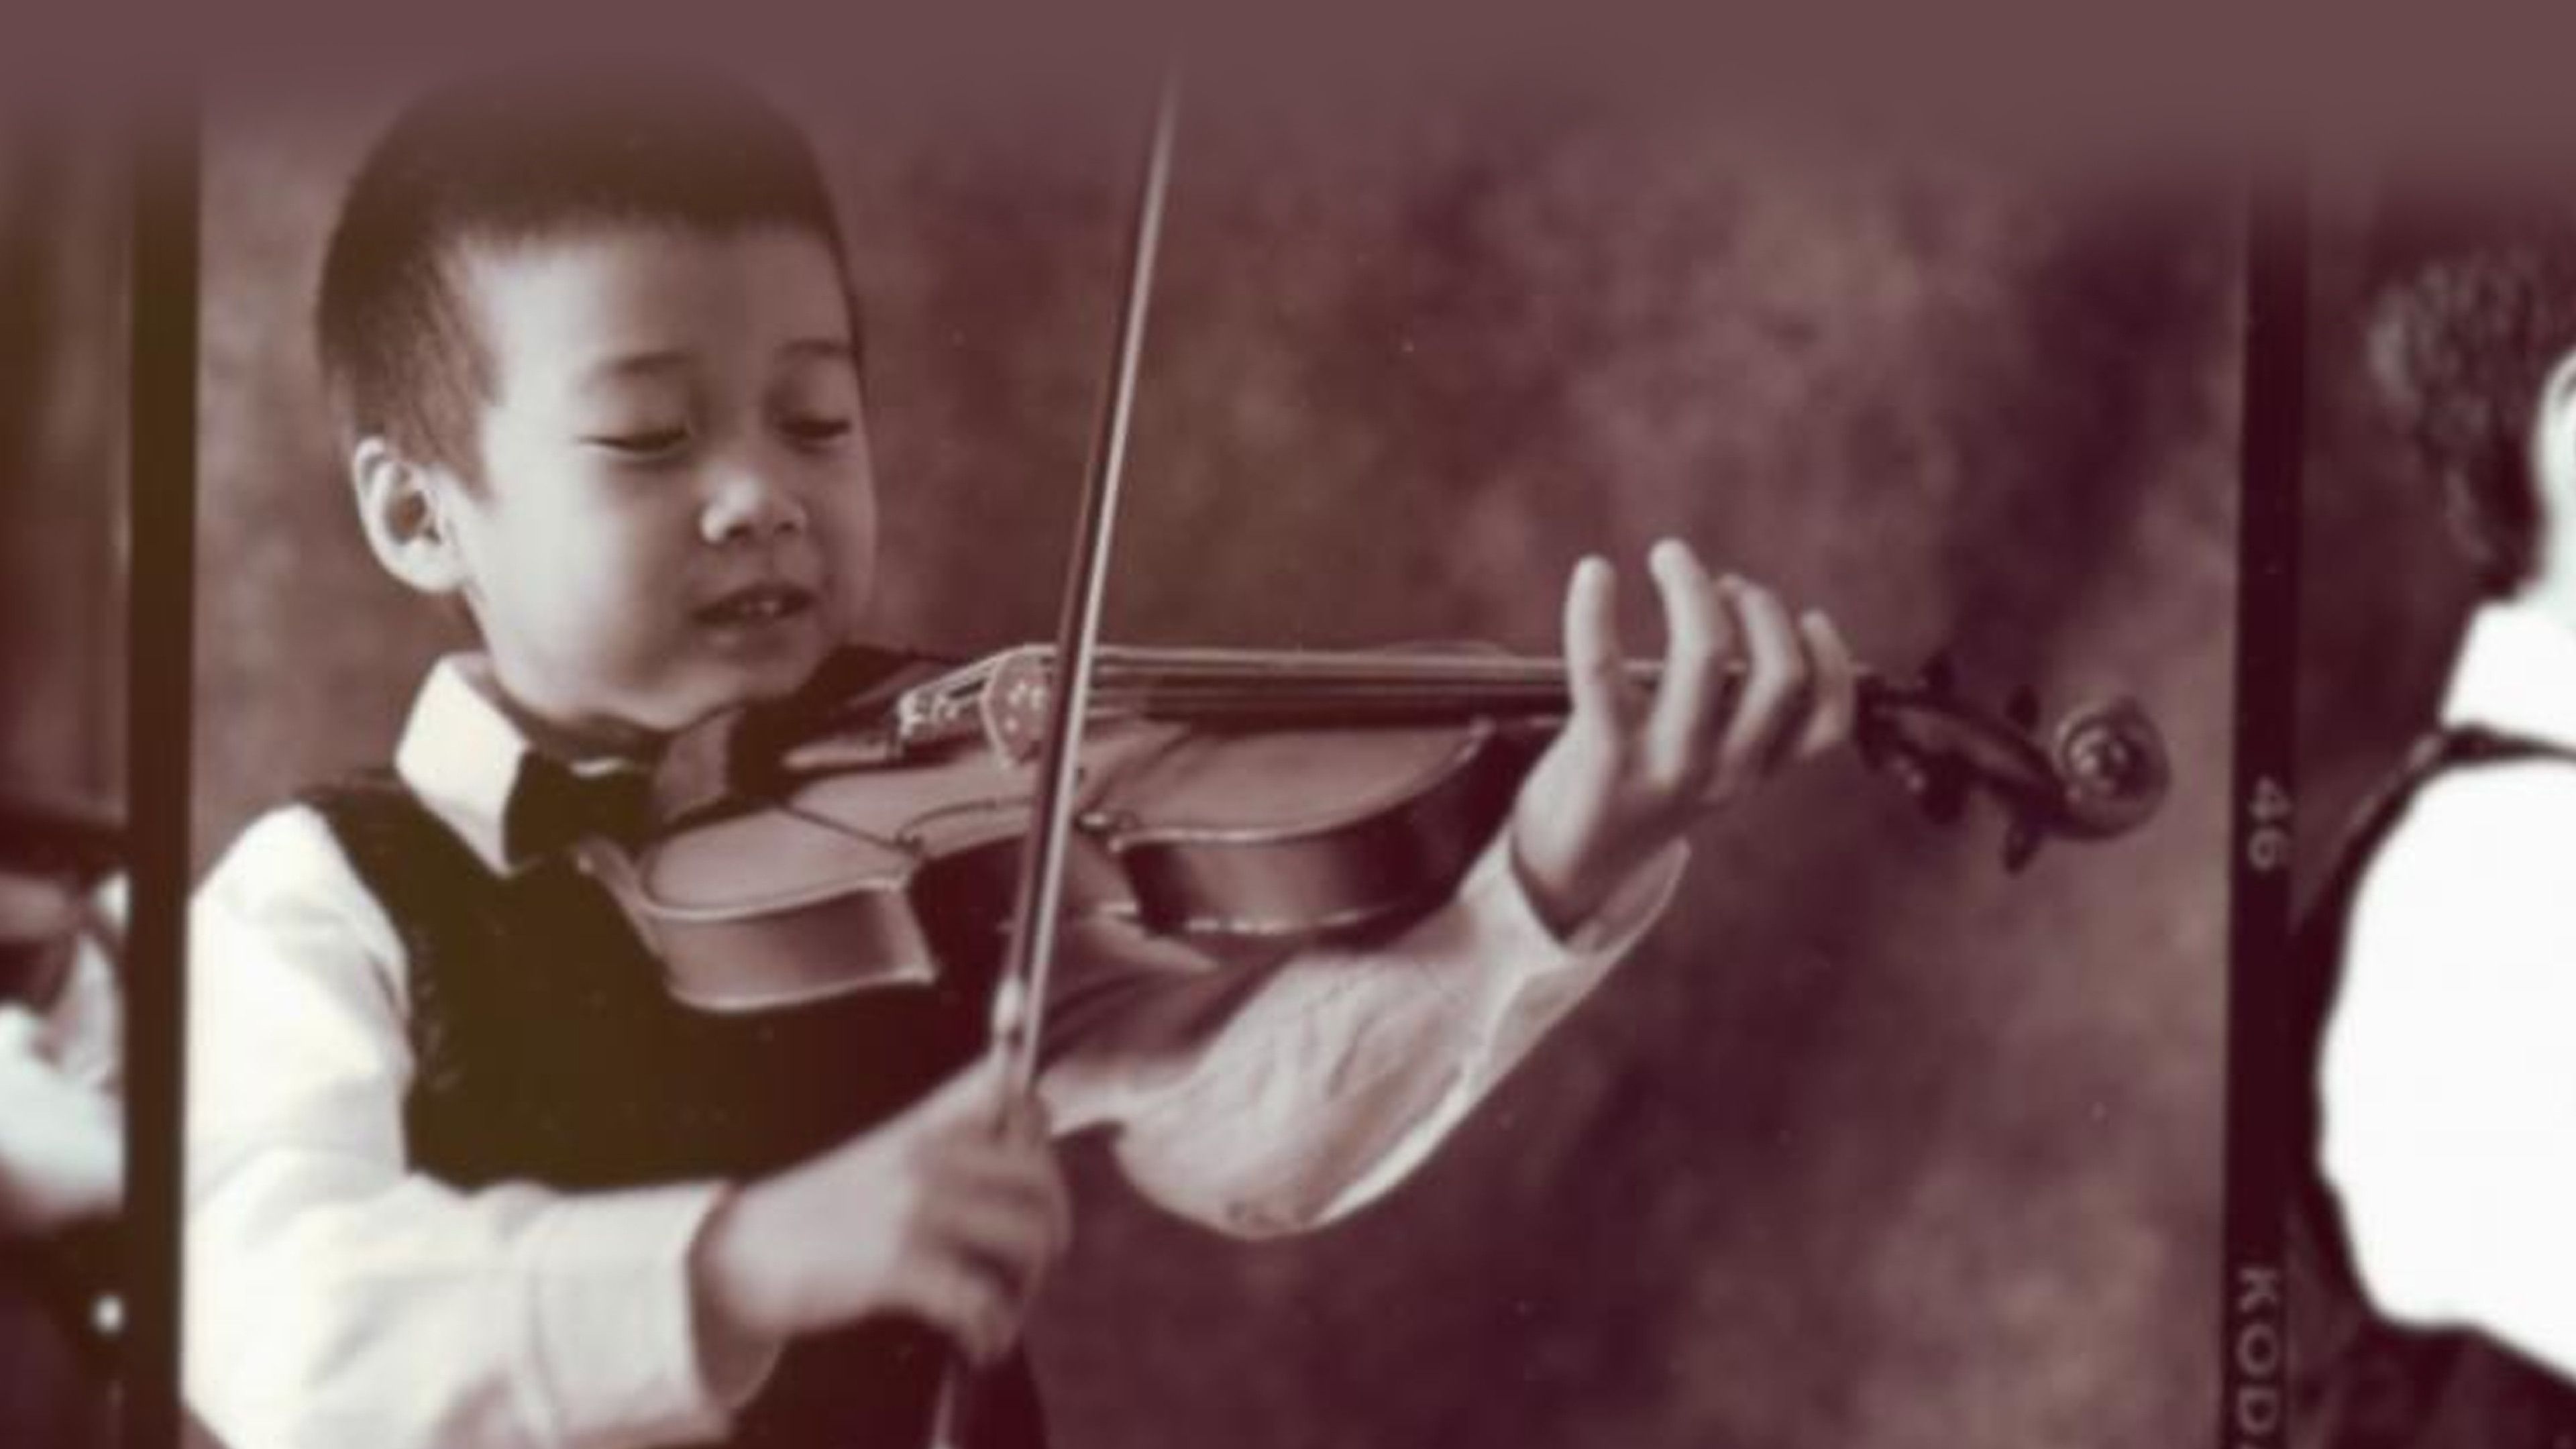 How Did You Become a World Class Violinist?